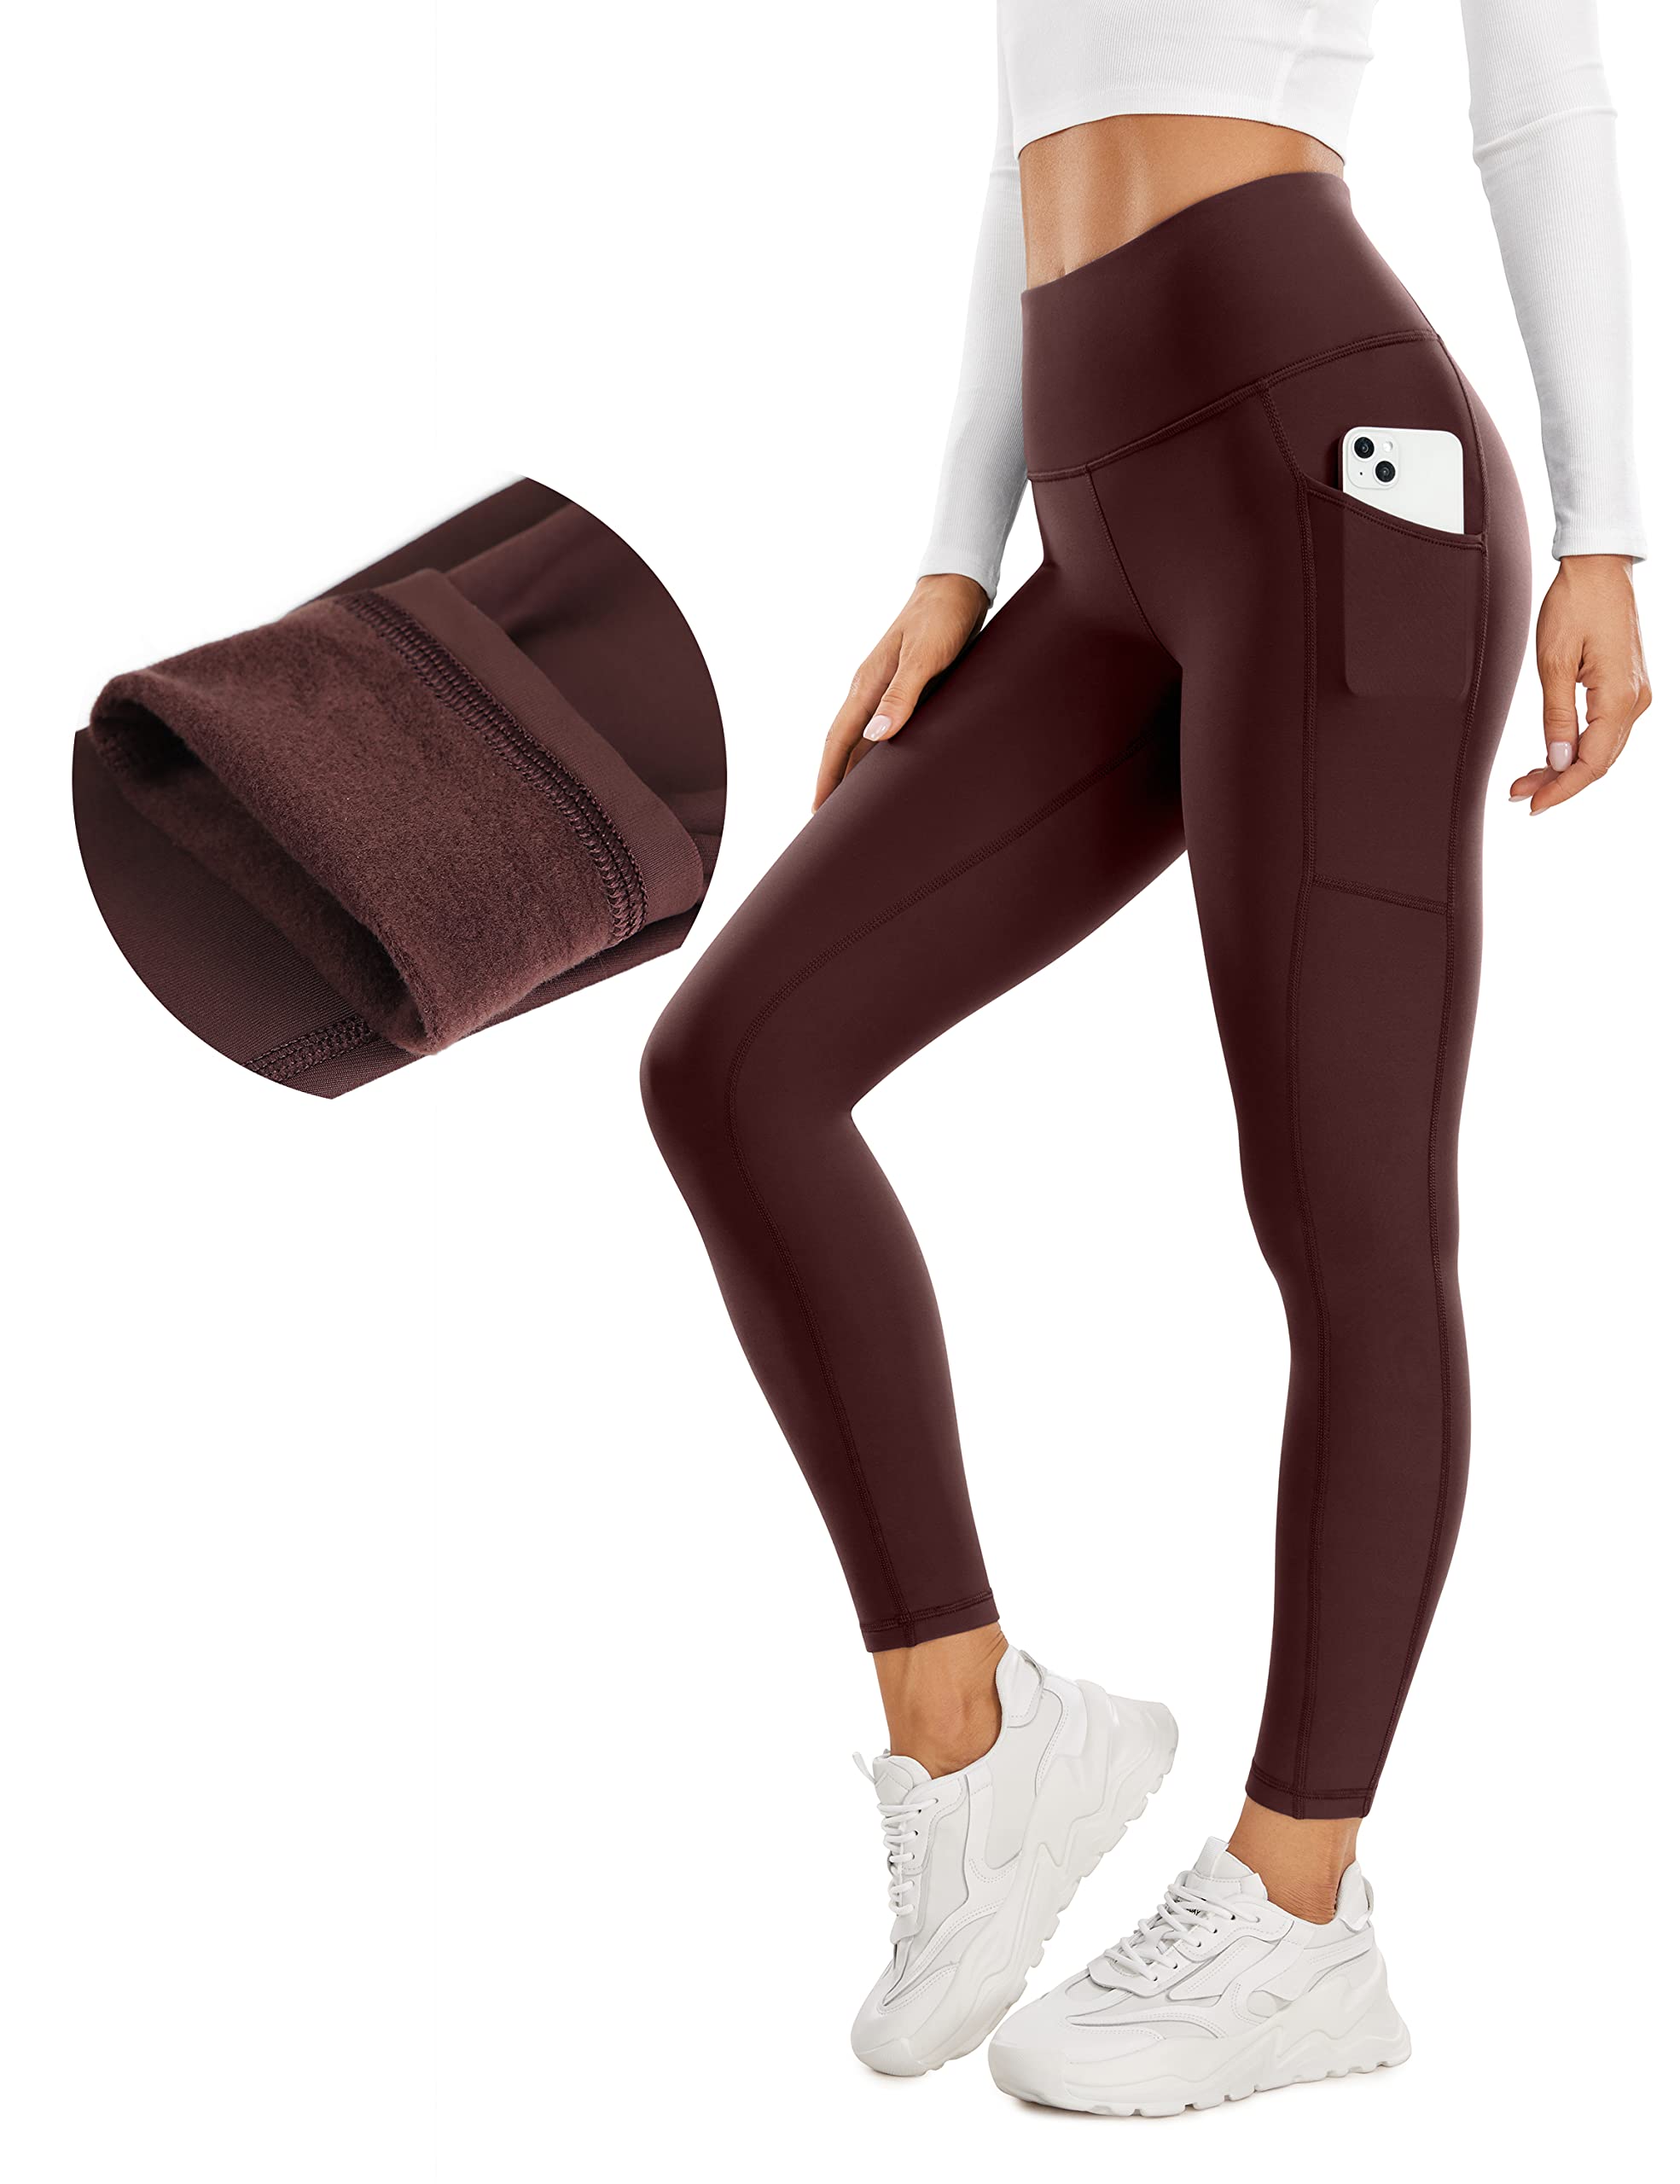 cRZ YOgA Thermal Fleece Lined Leggings Women 25 - High Waisted Winter  Workout Hiking Pants with Pockets Warm Running Tights Taup